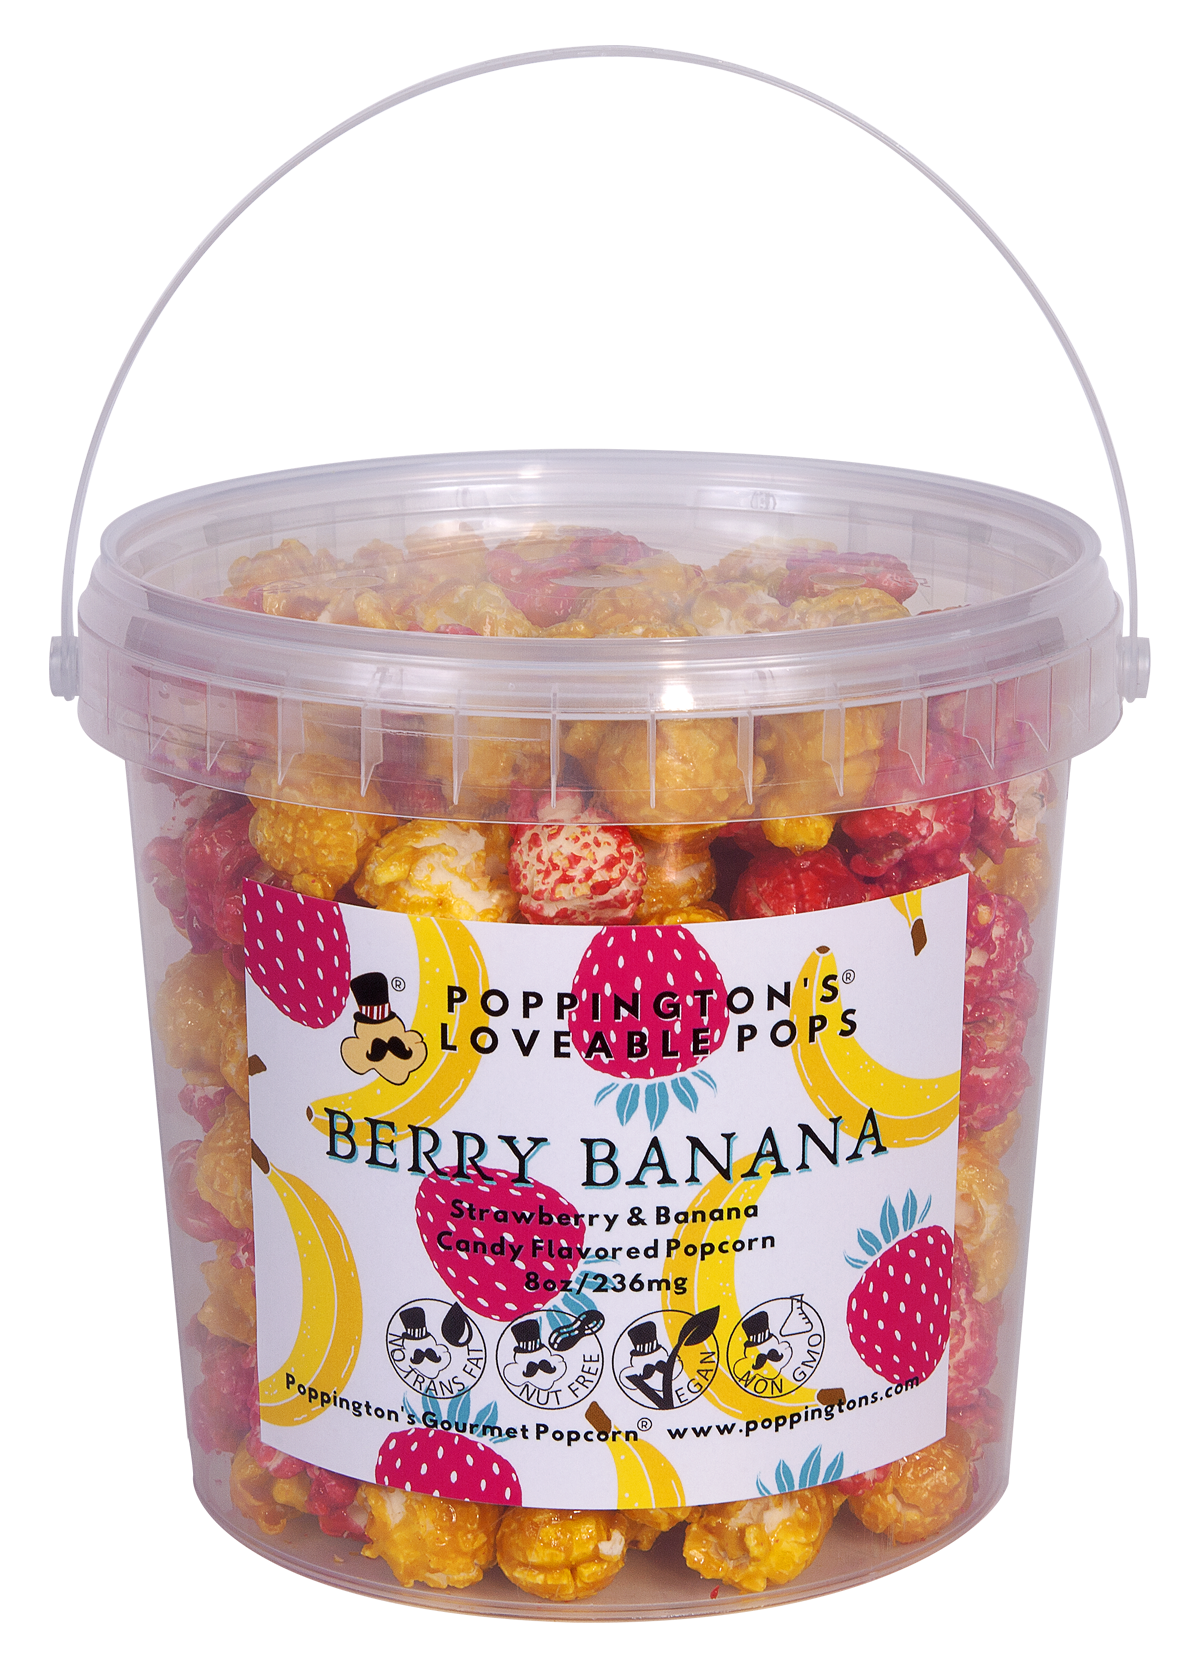 Loveable Pops Pails Berry Banana Flavor by Poppington's Gourmet Popcorn